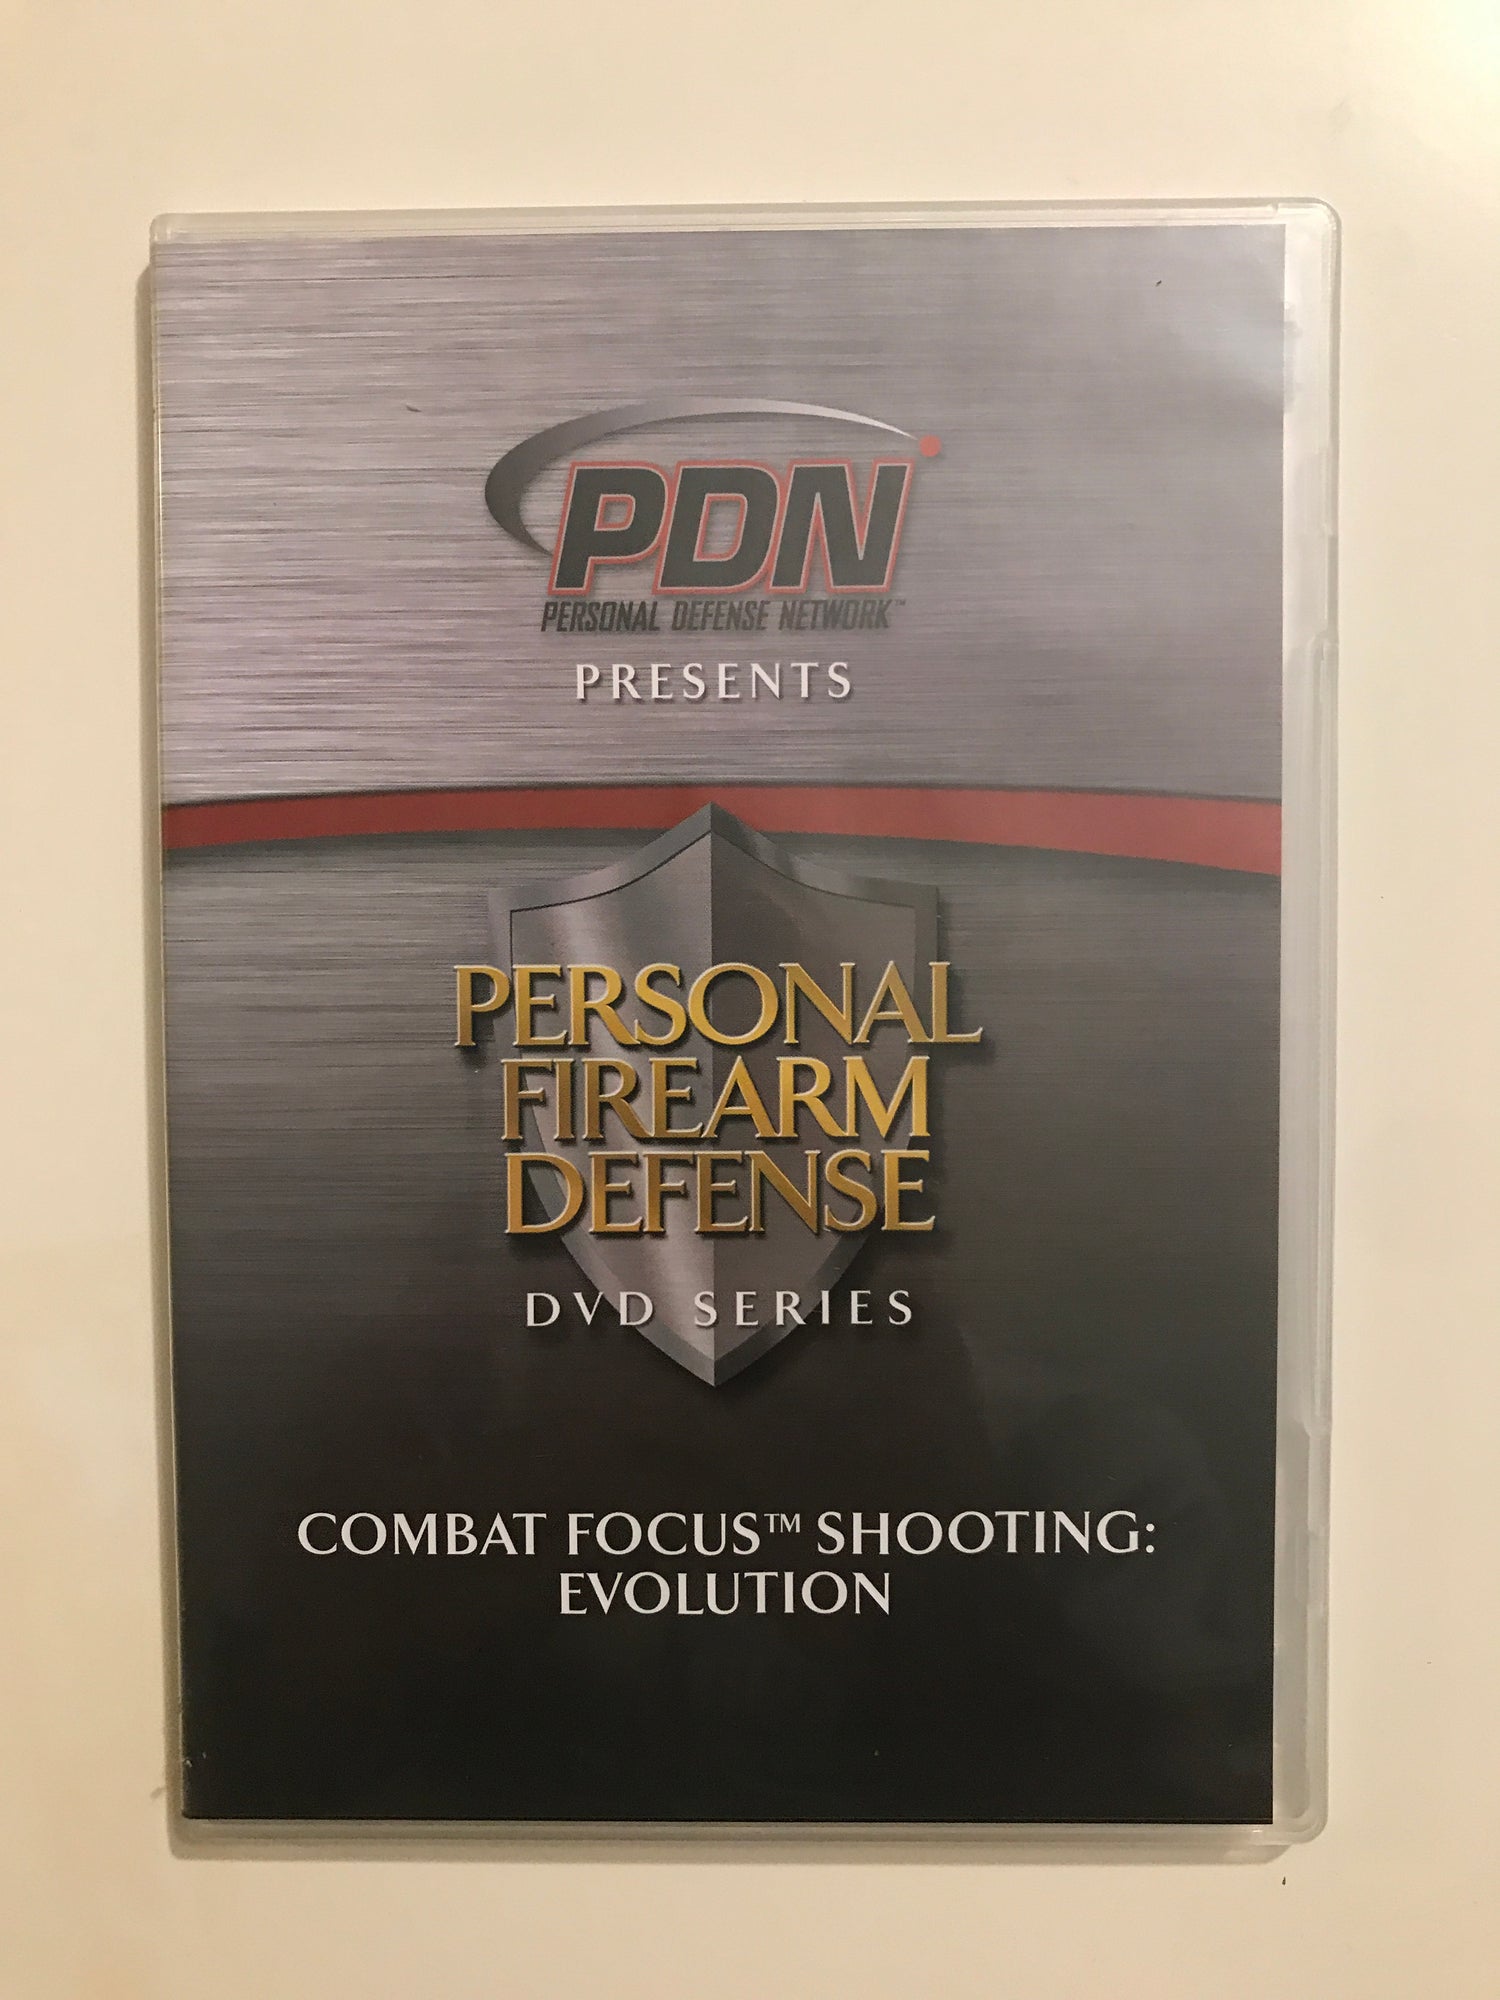 Personal Firearm Defense: Combat Focus Shooting Evolution DVD by Rob Pincus (Preowned) - Budovideos Inc